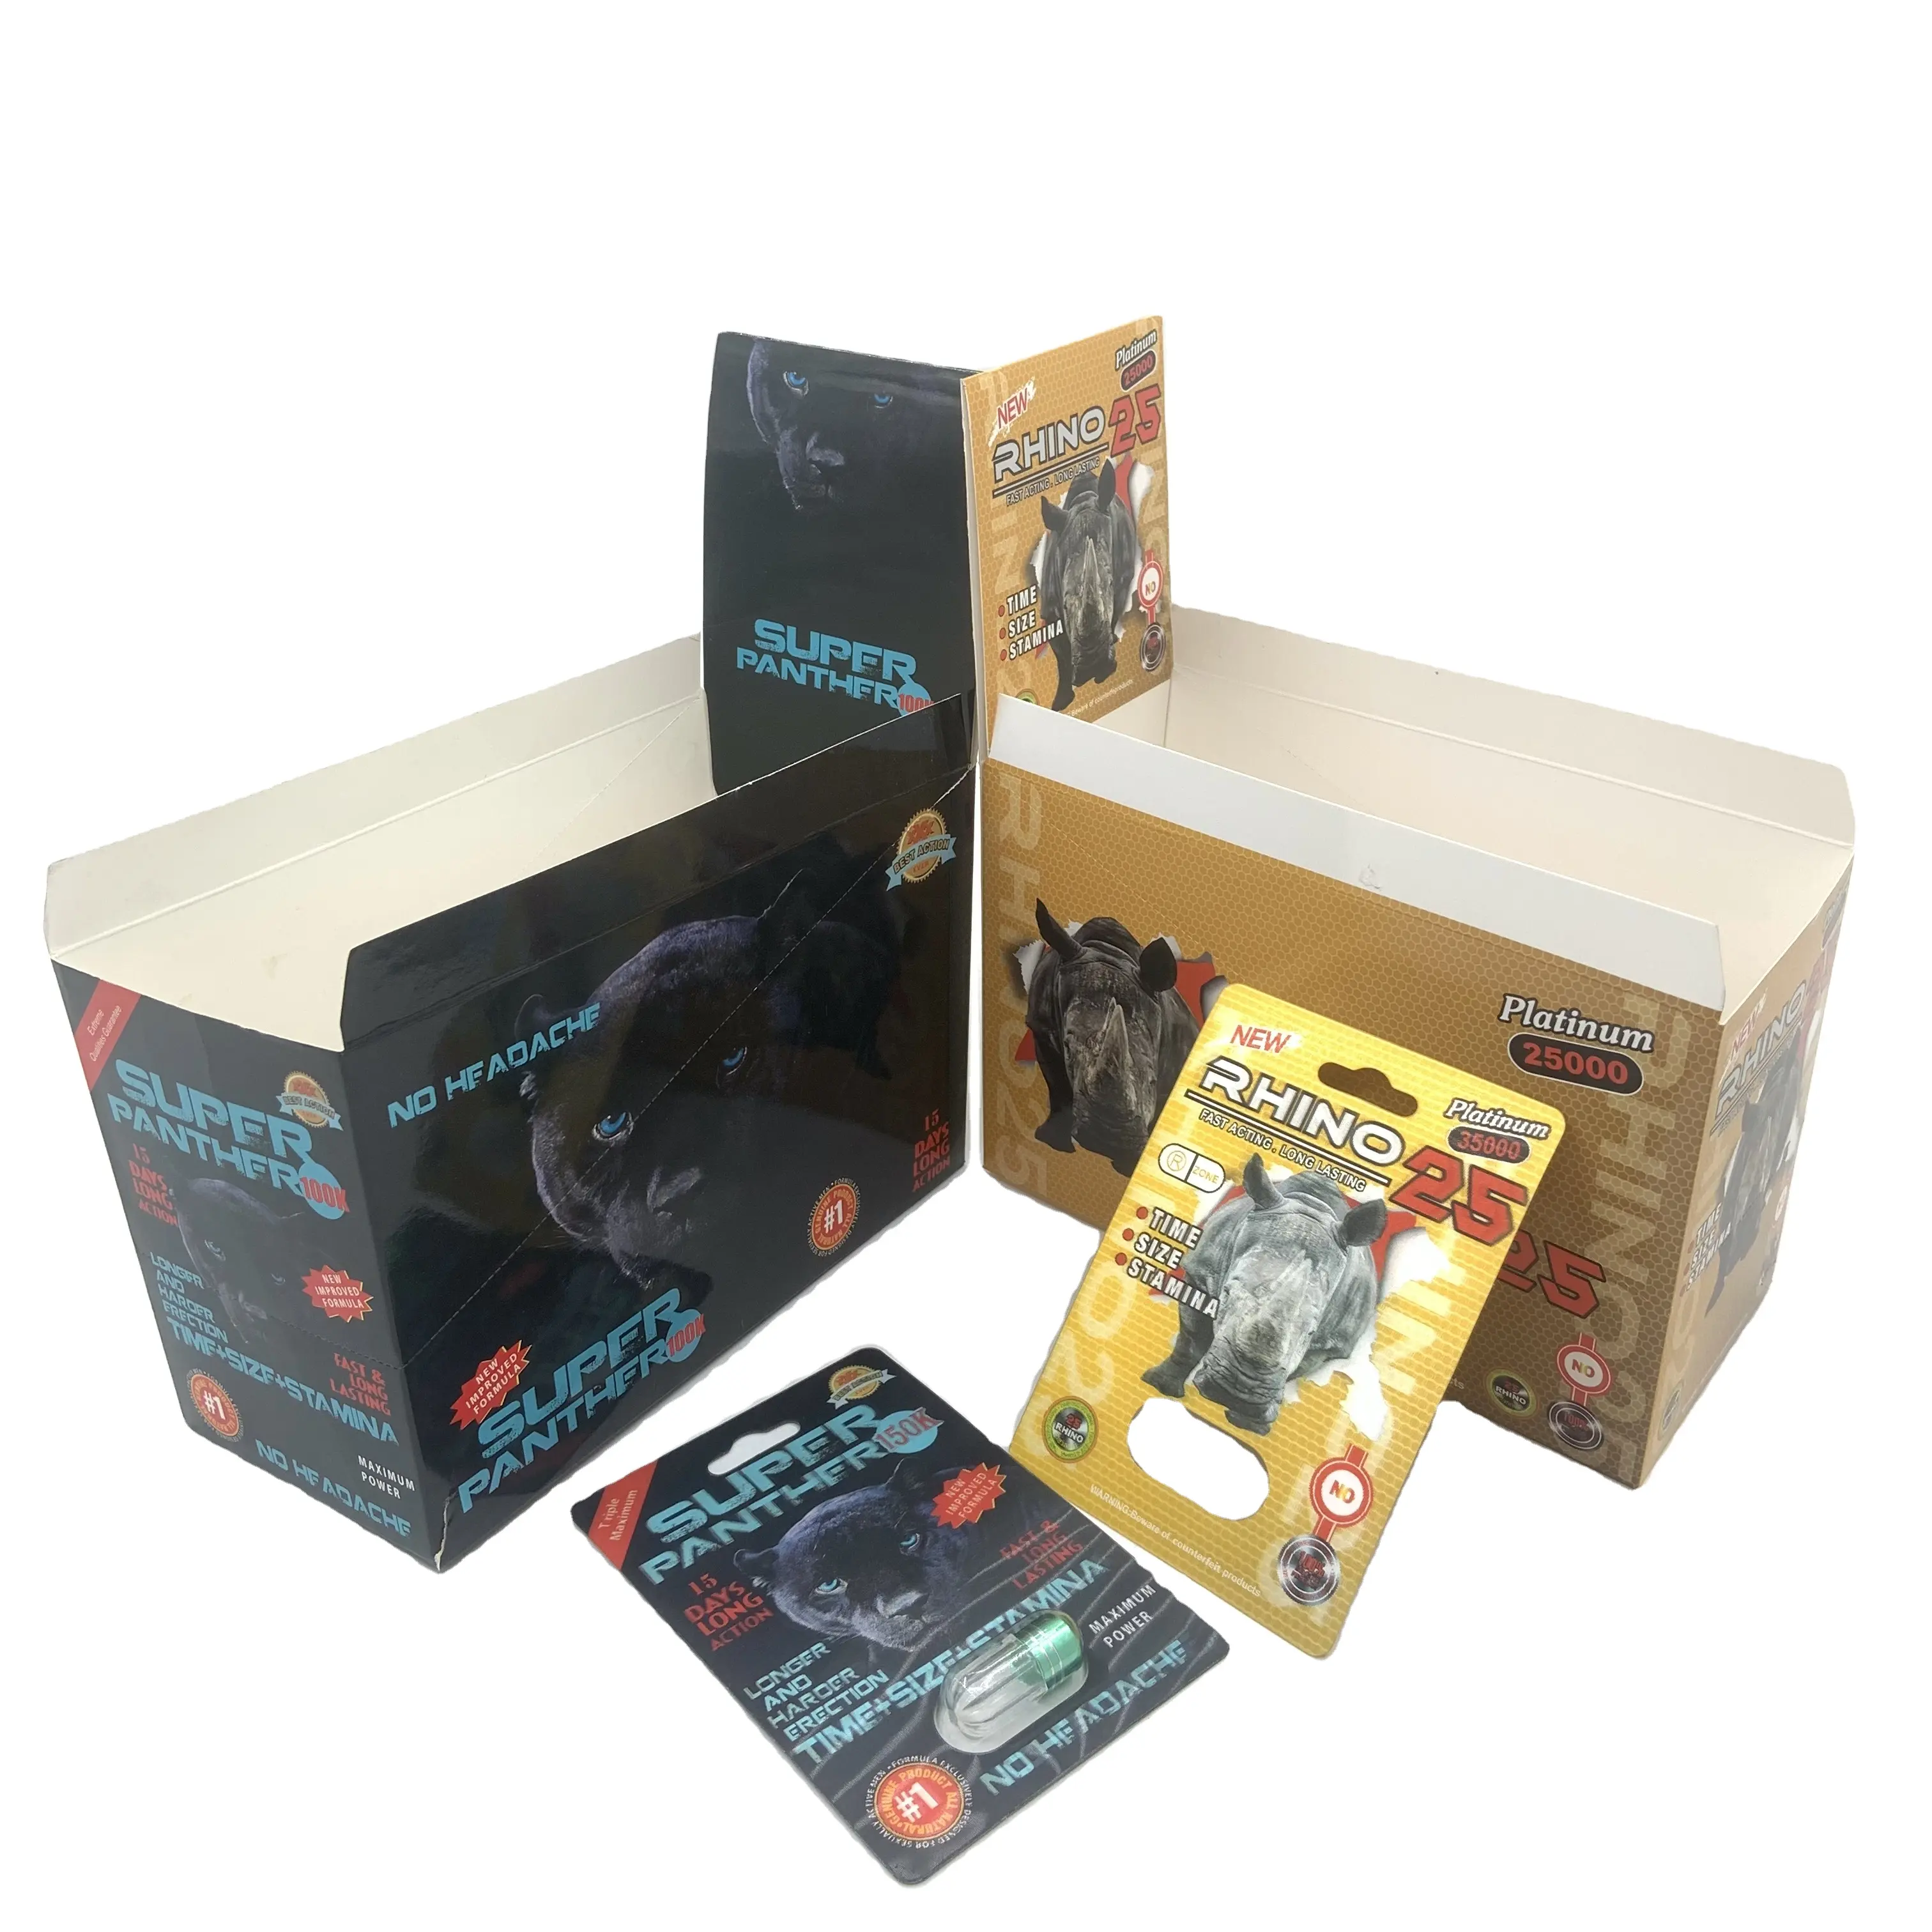 Wholesale Paper Box Black Panther Rhion 25 3D Lenticular Card With Plastic Bottles For Male Enhancement Pills Packaging